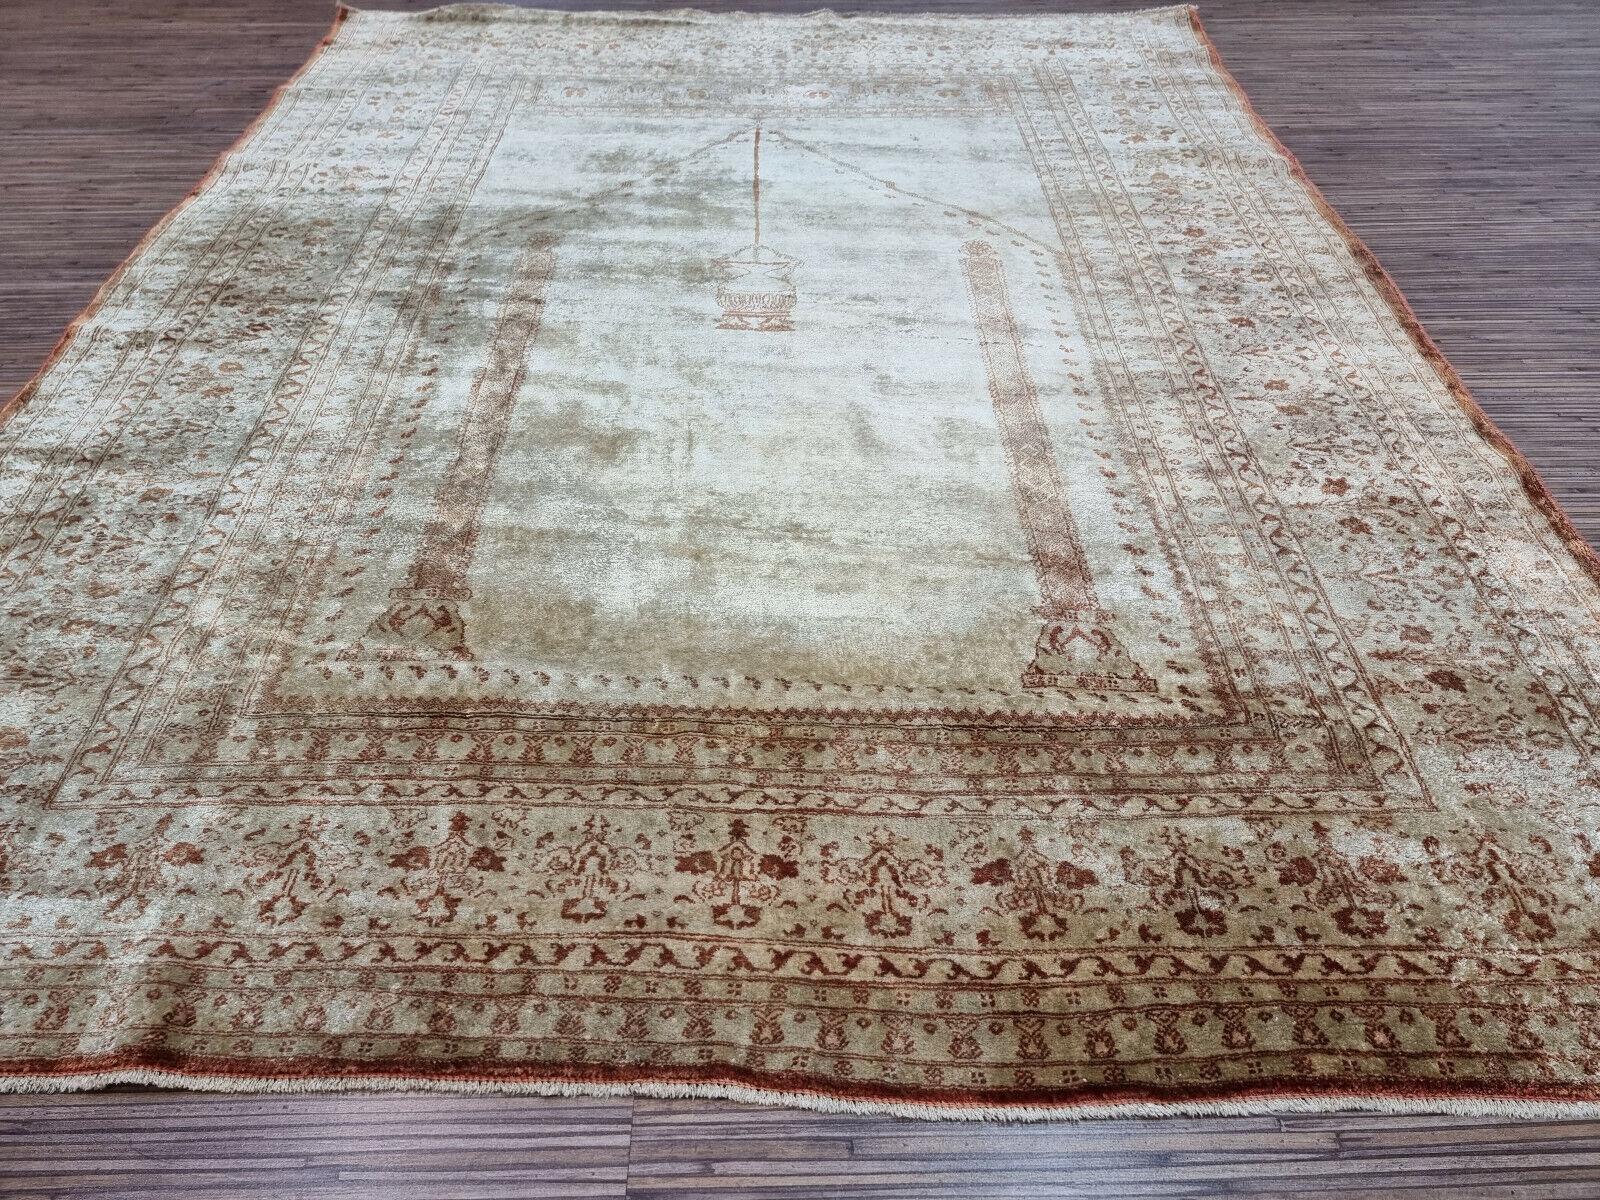 Hand-Knotted Handmade Antique Persian Style Tabriz Prayer Silk Rug 4' x 5.2', 1900s - 1D83 For Sale